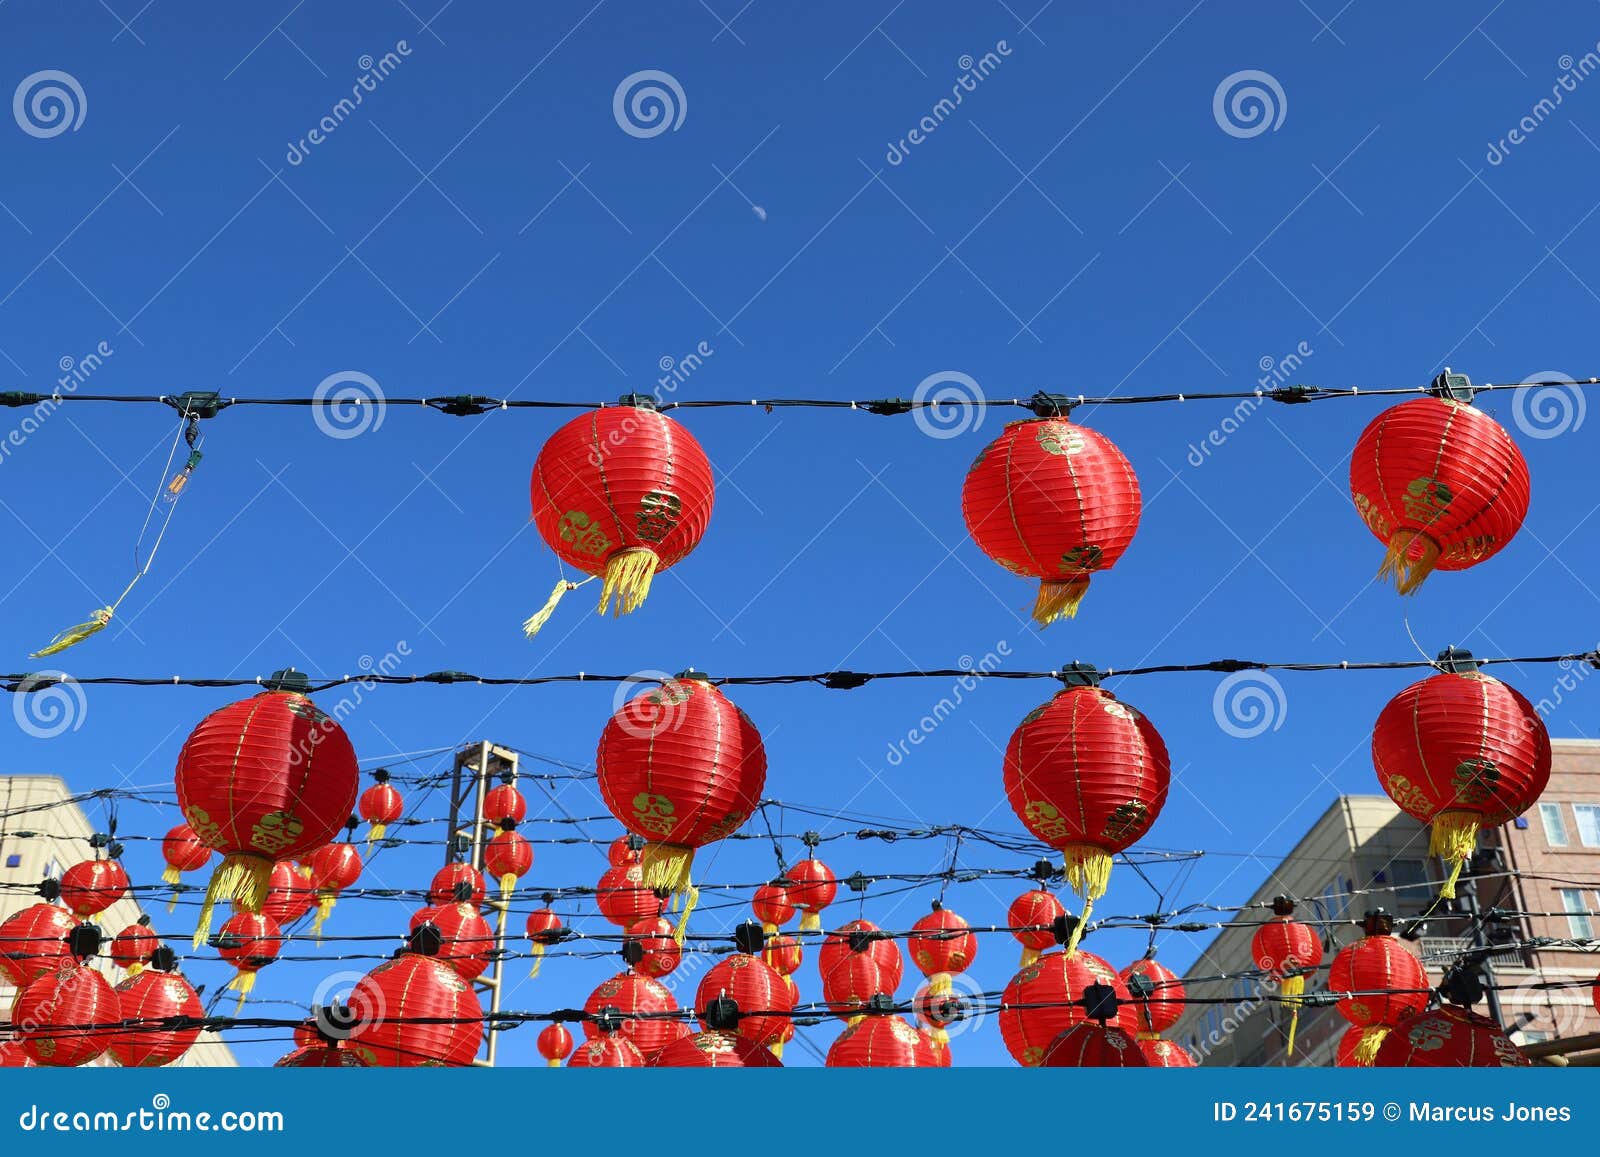 A Gorgeous Shot of Rows of Red Chinese Lanterns Hanging from Black Cables  with a Blue Sky Background at Atlantic Station Stock Image - Image of china,  celebration: 241675159